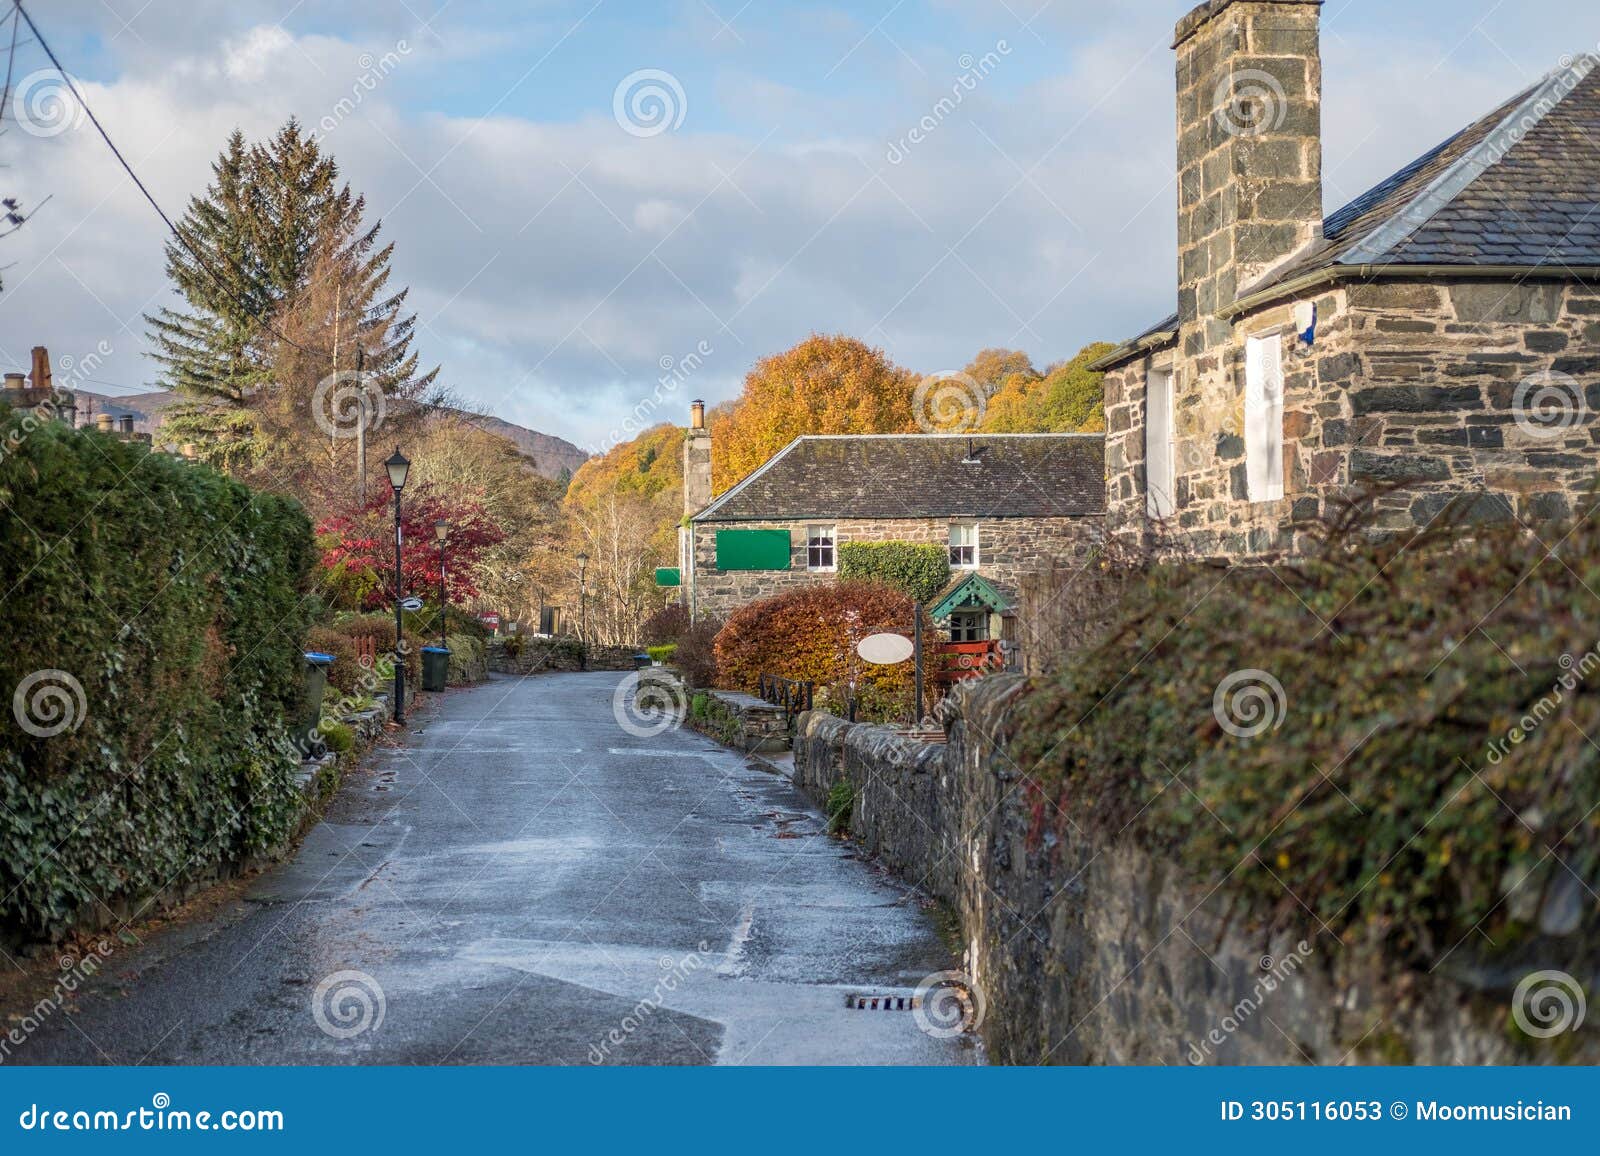 pitlochry, a burgh in the county of perthshire in scotland